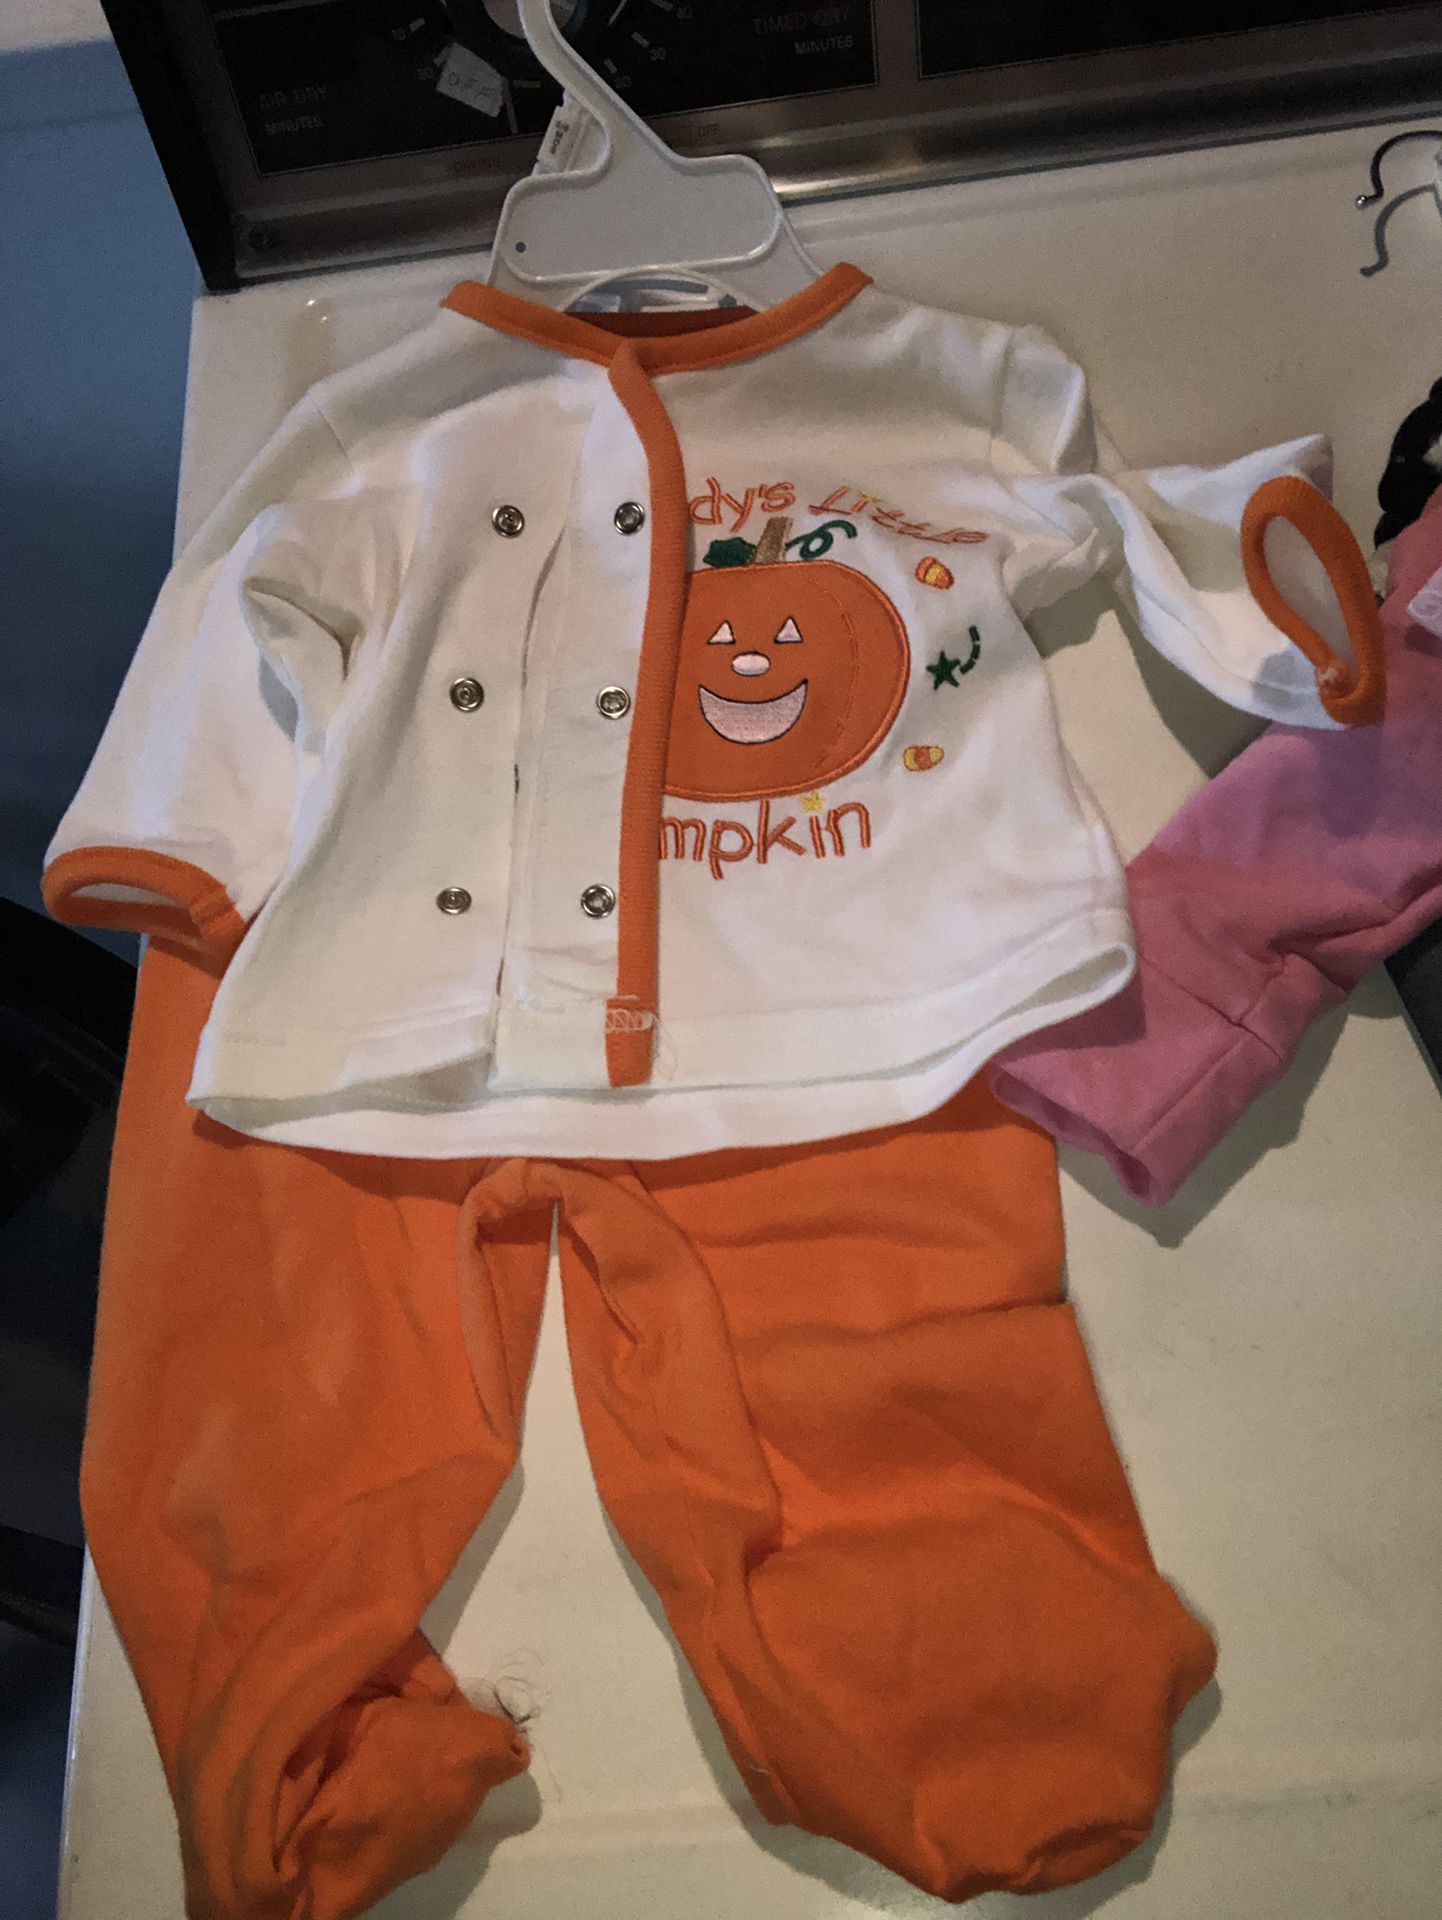 Baby brand new clothes A dollar each piece I also have garbage bags full of boys and girls use clothes in good condition and they will be $.50 each I